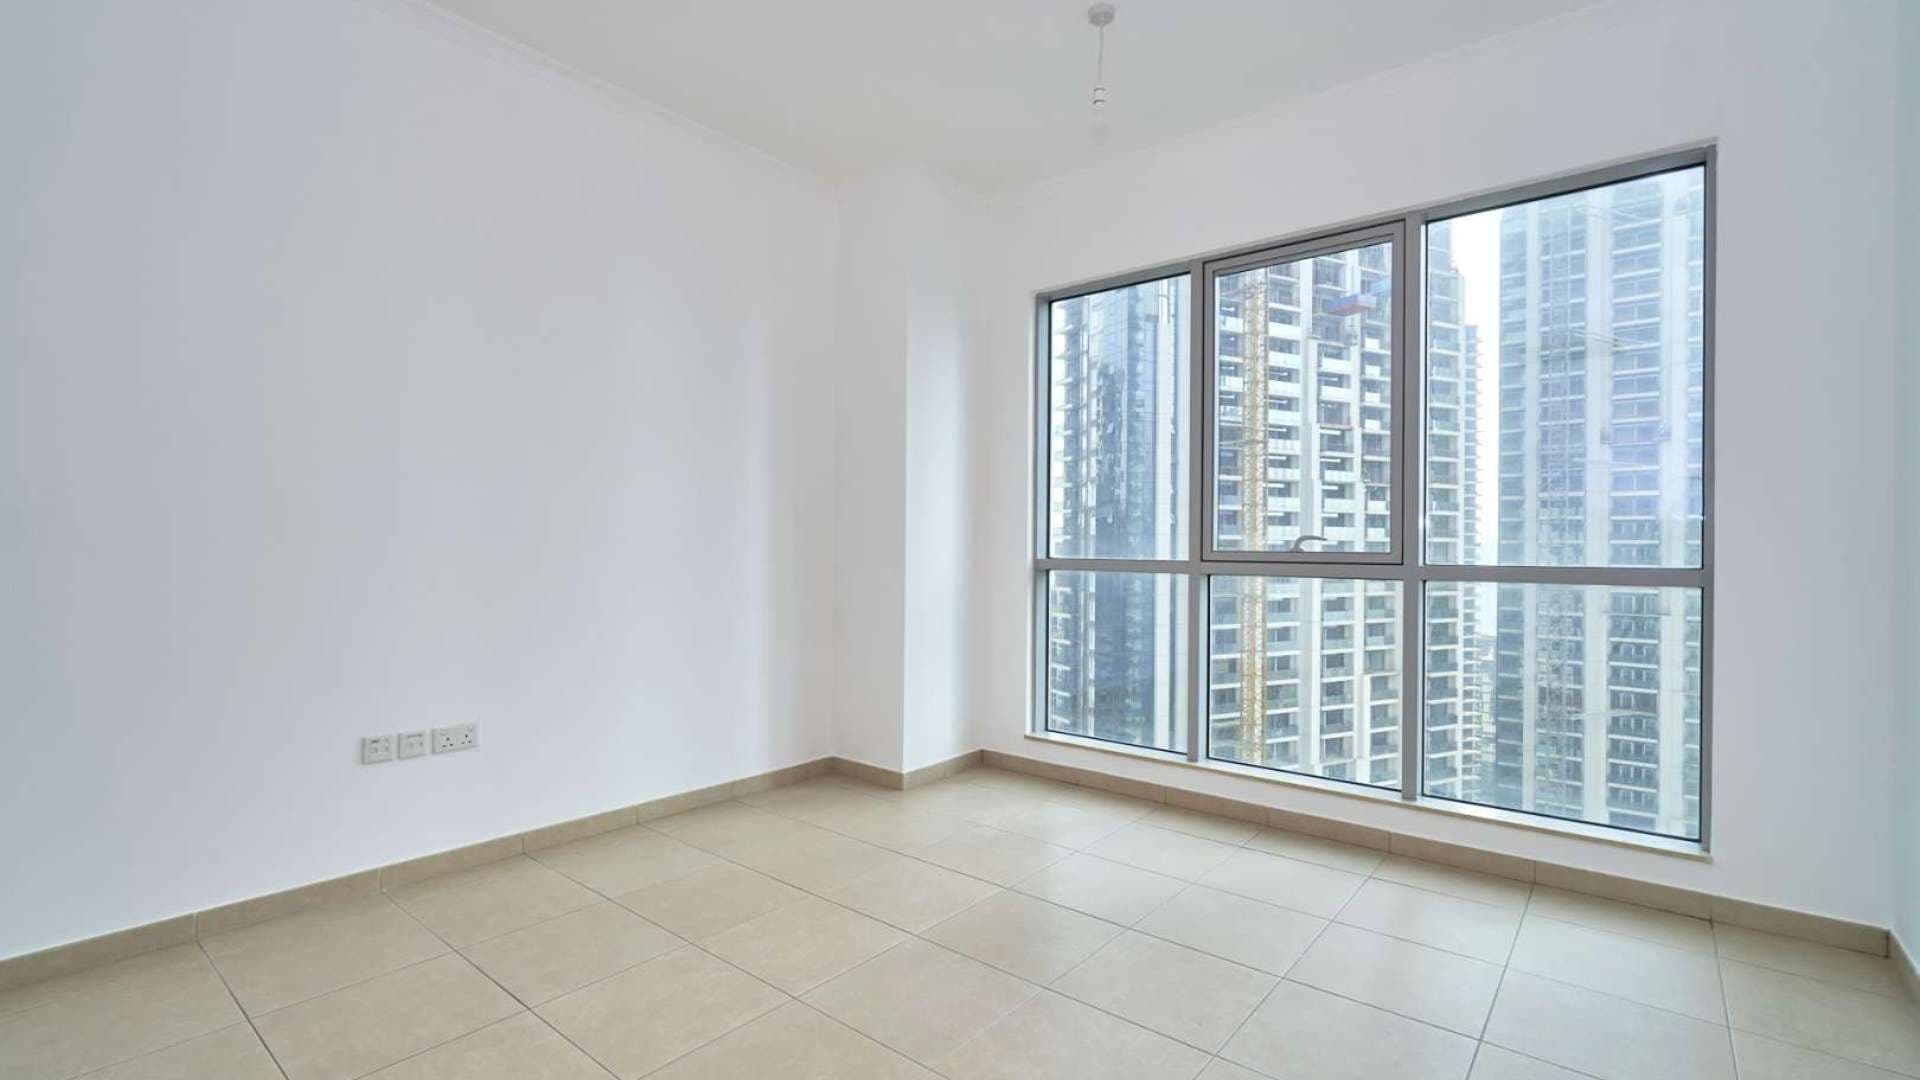 3 Bedroom Apartment For Rent The Residences Lp11606 17fc34d8a0352100.jpg